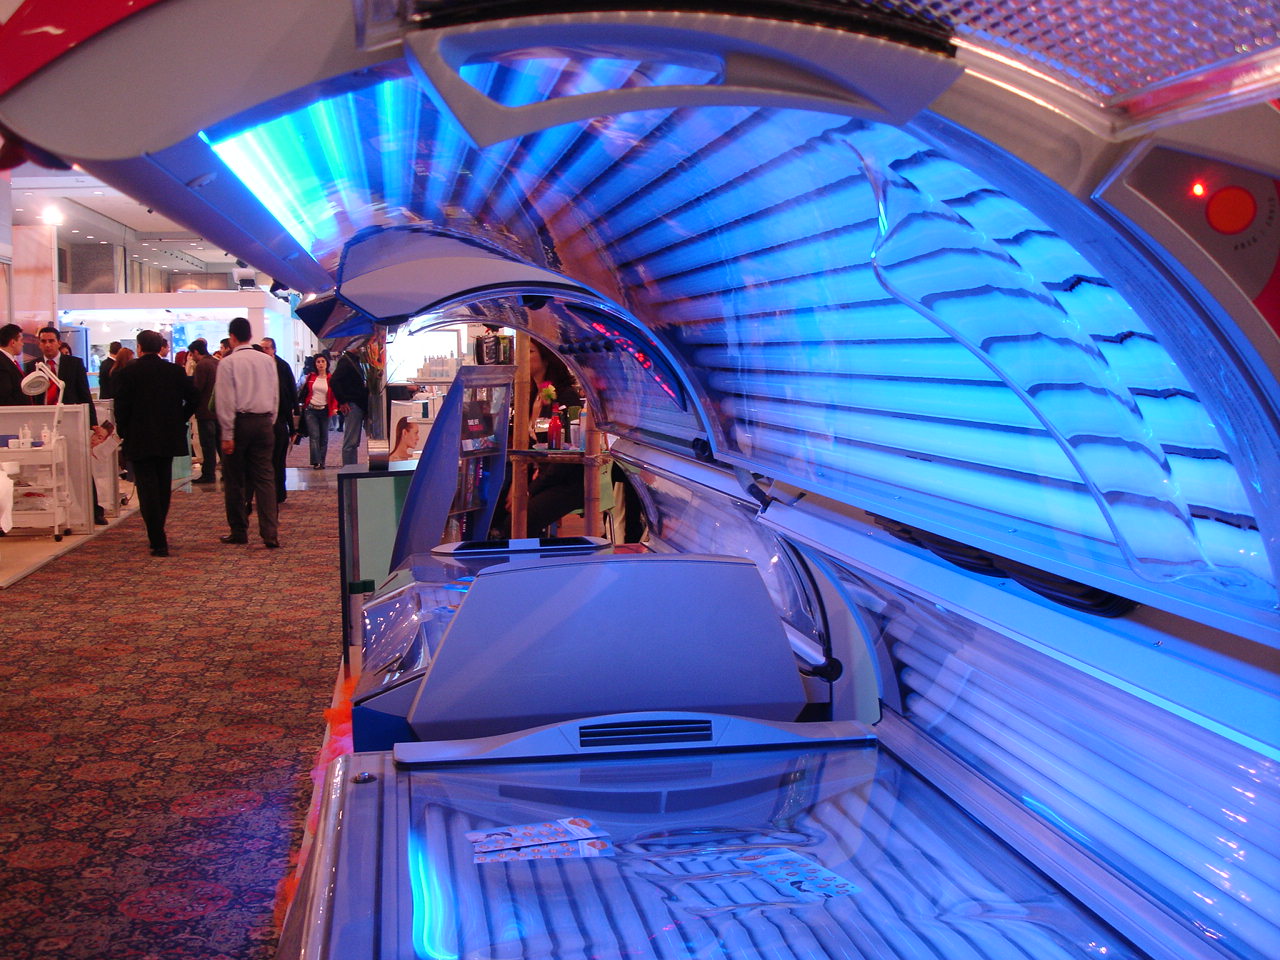 5 Day How Much To Buy A Tanning Bed for Beginner